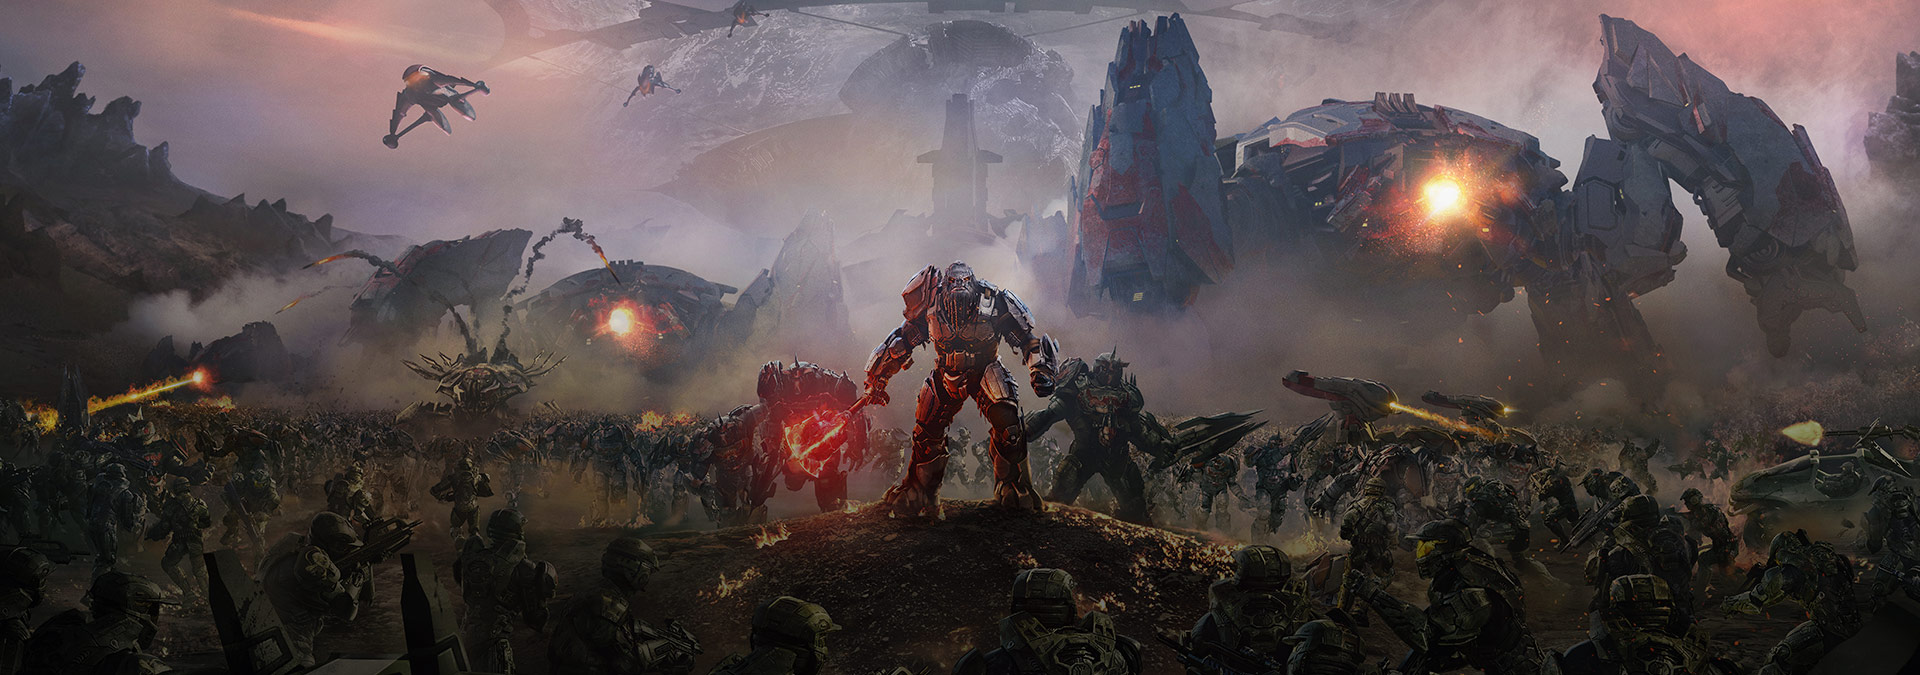 Halo Wars 2 | Games | Halo - Official Site